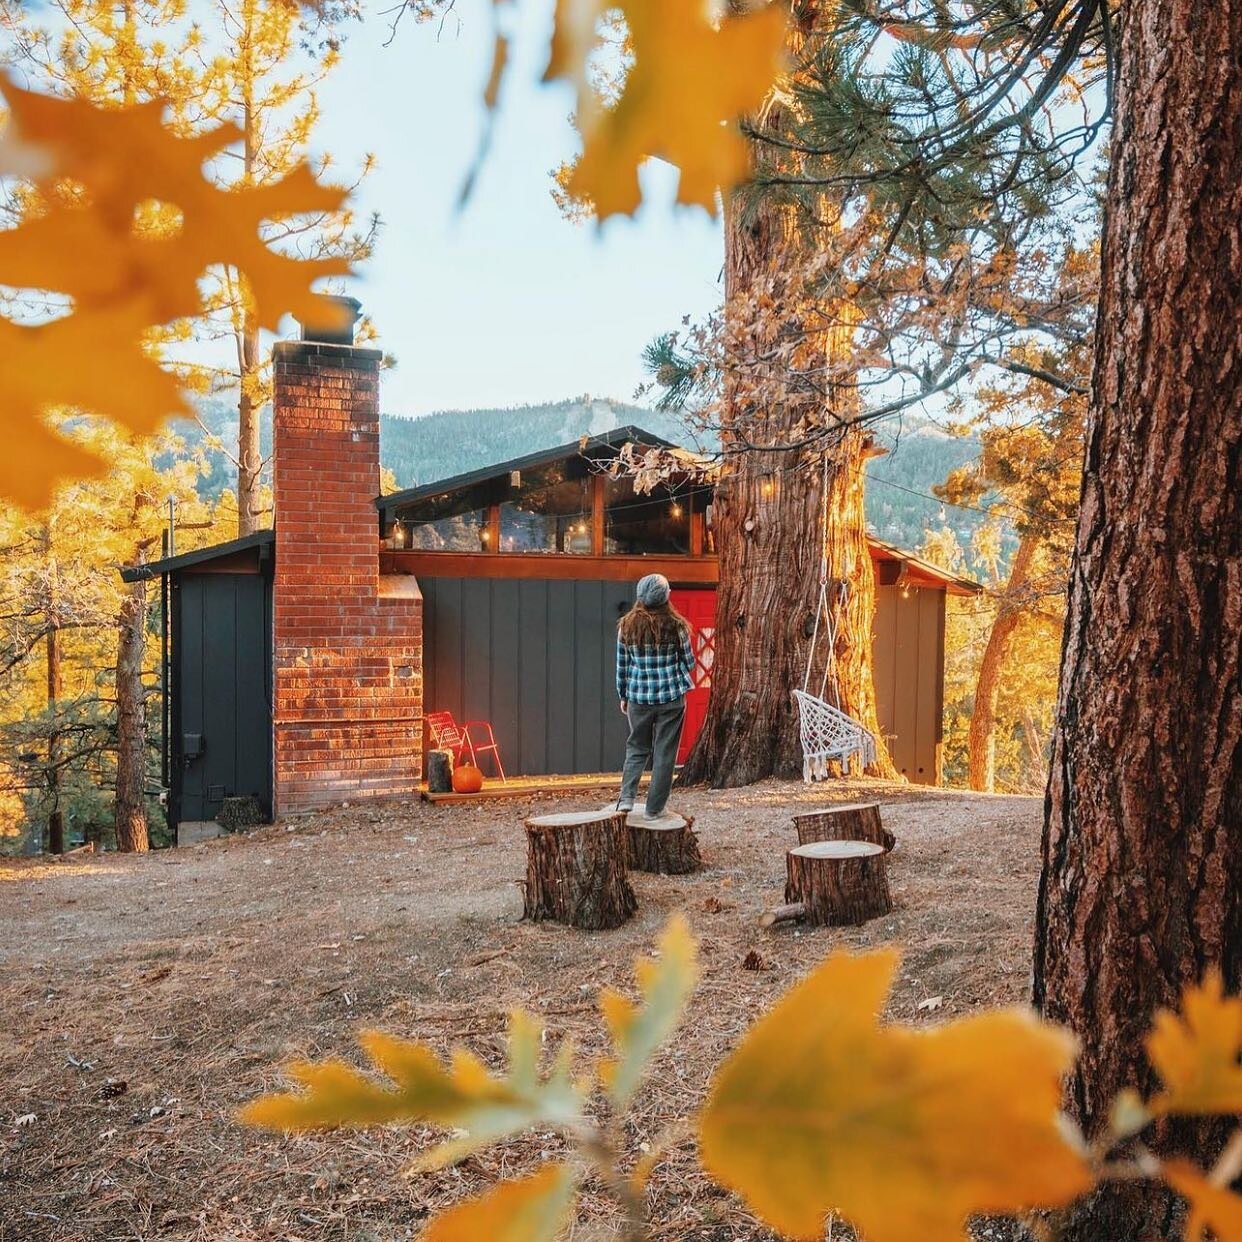 Check out this wonderful cabin in @bigbearlakecalifornia! Have you visited the mountains laity? No where I&rsquo;d rather be! 

This cabin is @treehauschalet! Check out the page and show some love! 

#CabinLife #RusticRetreat #AmericanCabins #LogCabi